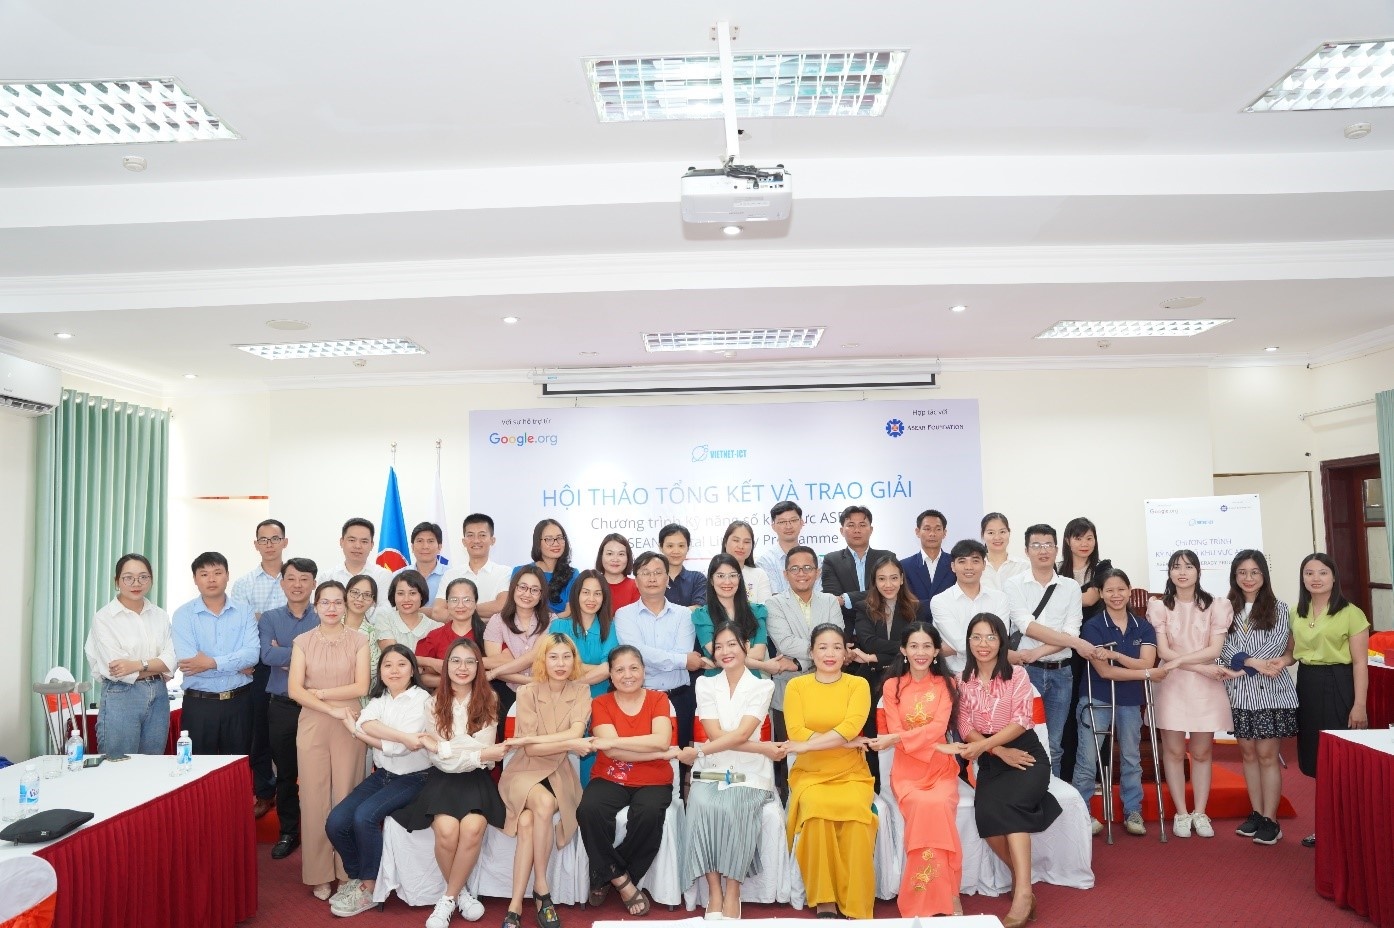 Promoting digital skills and online safety with ASEAN initiative